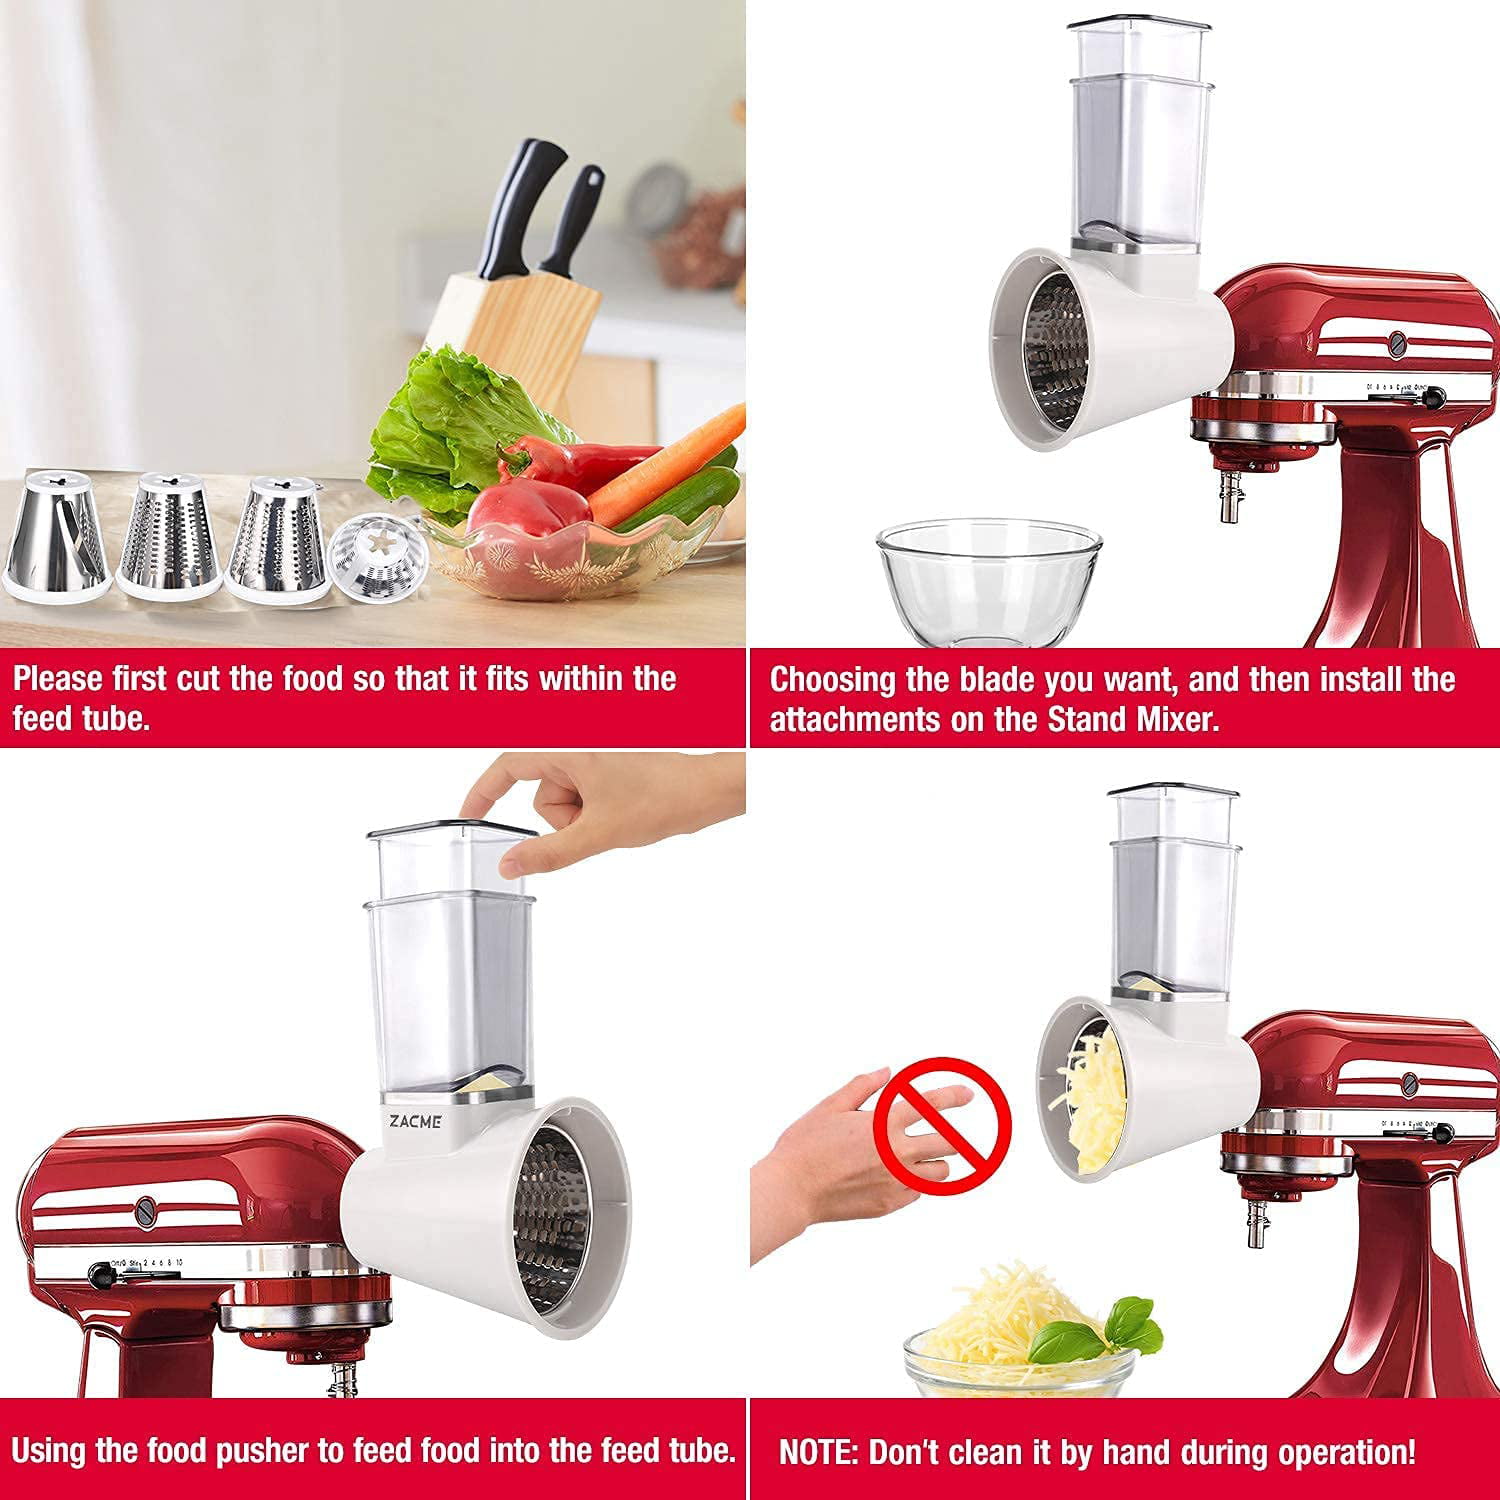  FavorKit Large Stainless Steel Slicer Shredder Attachment for  KitchenAid Mixers, Dishwasher Safe, Rotary Salad Maker/Cheese Grater  Accessories with 3 Drum Blades and 1 Knob Thumb Screw: Home & Kitchen